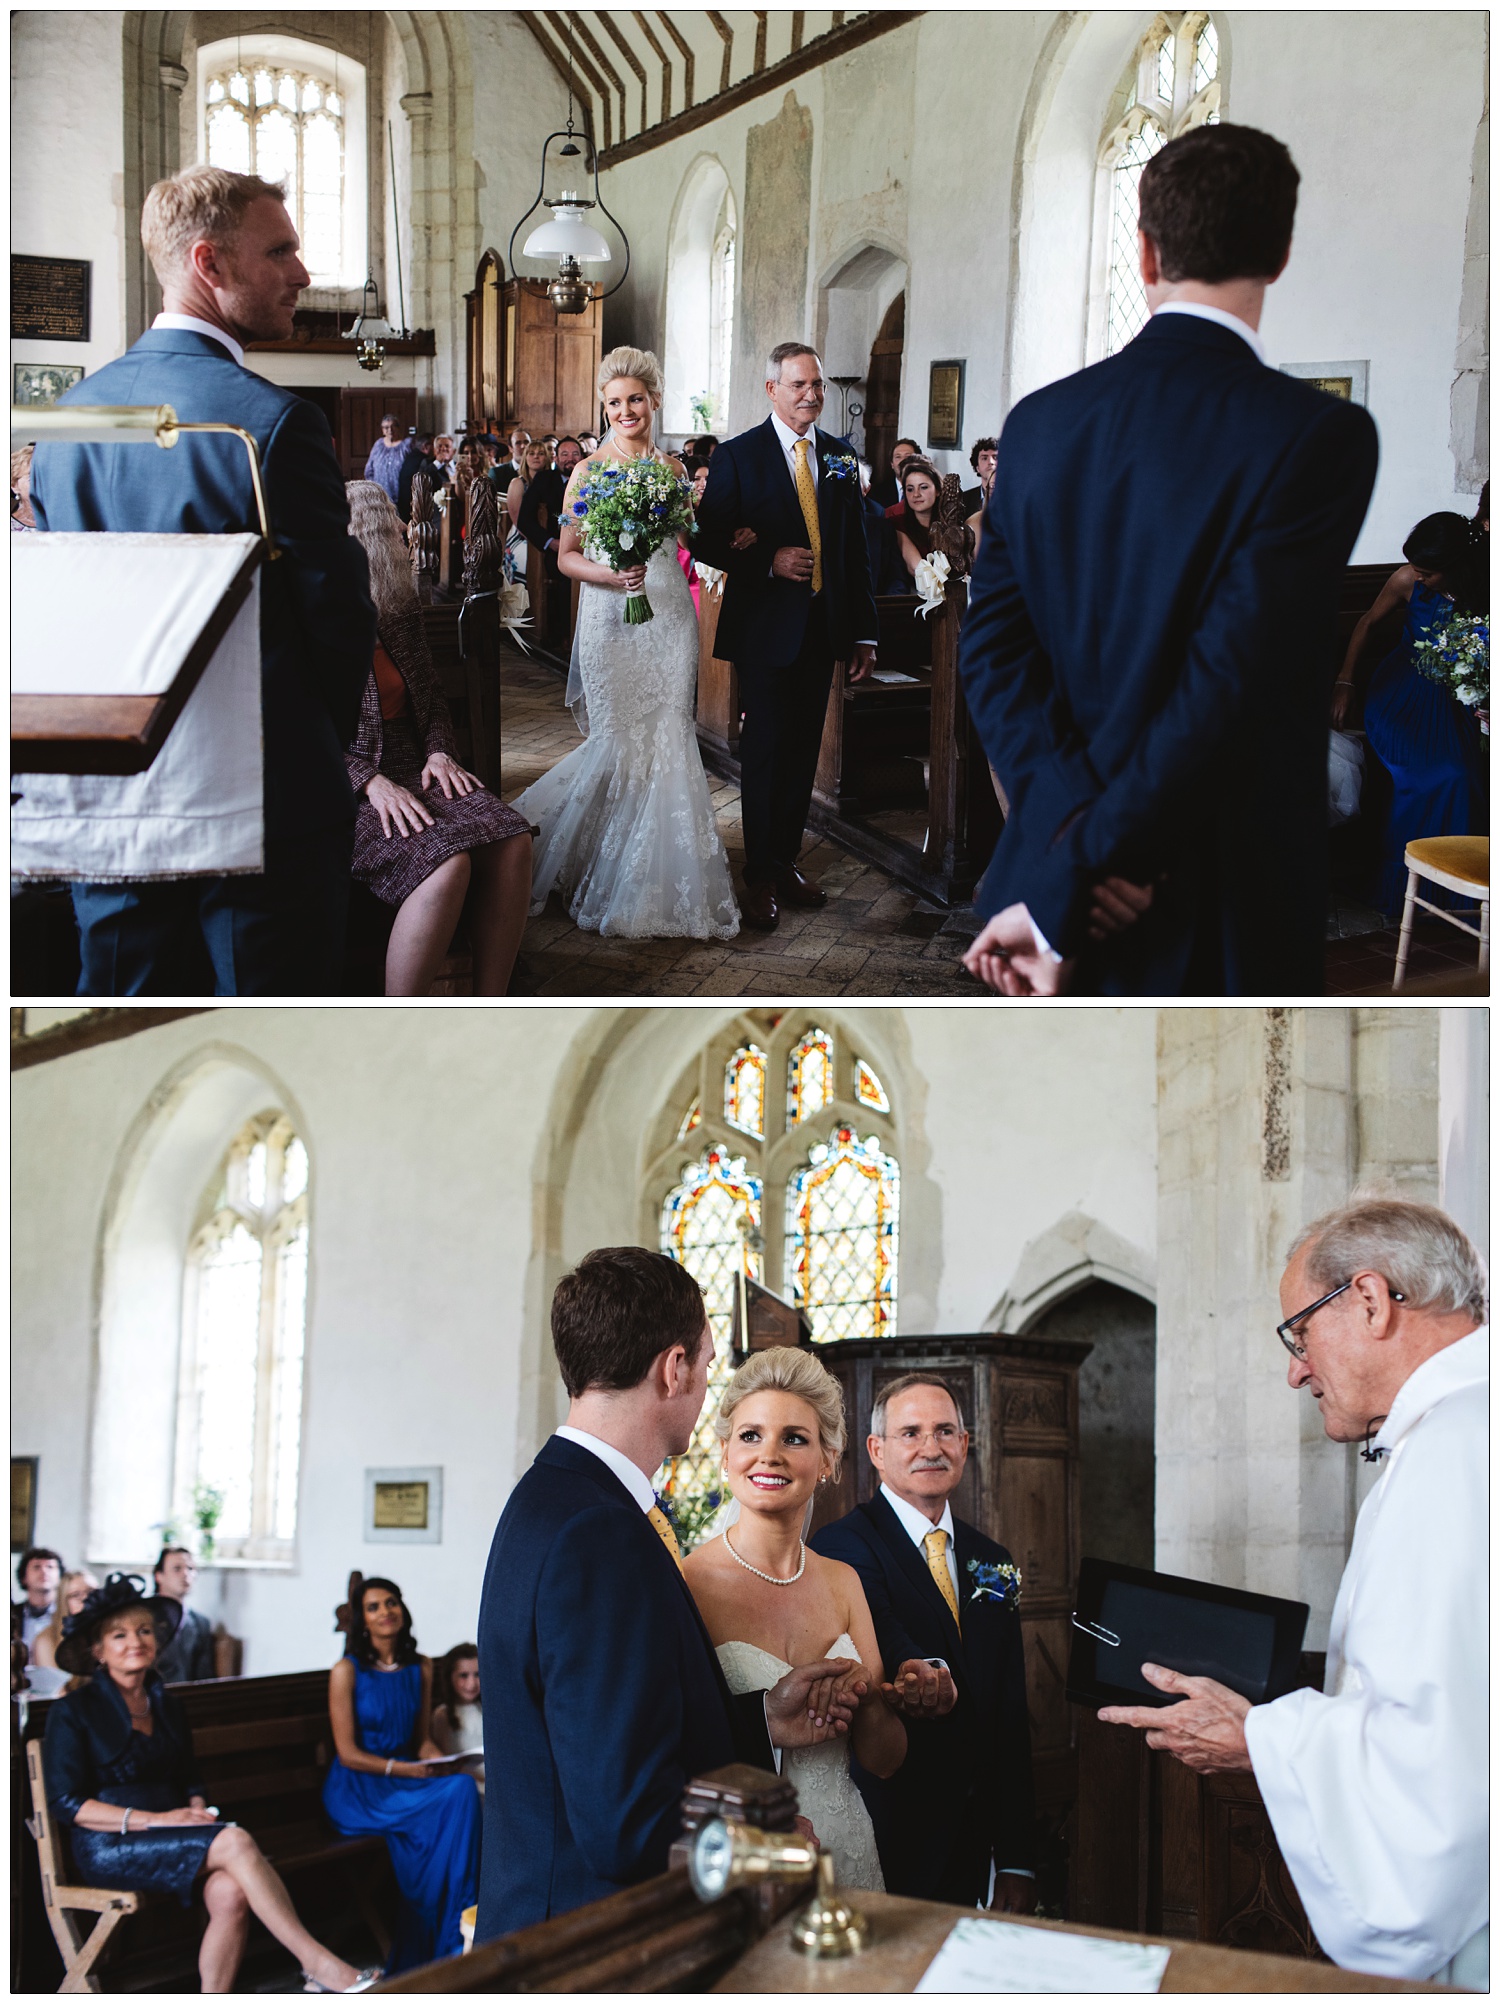 Wedding ceremony at St Peter & St Paul's Church